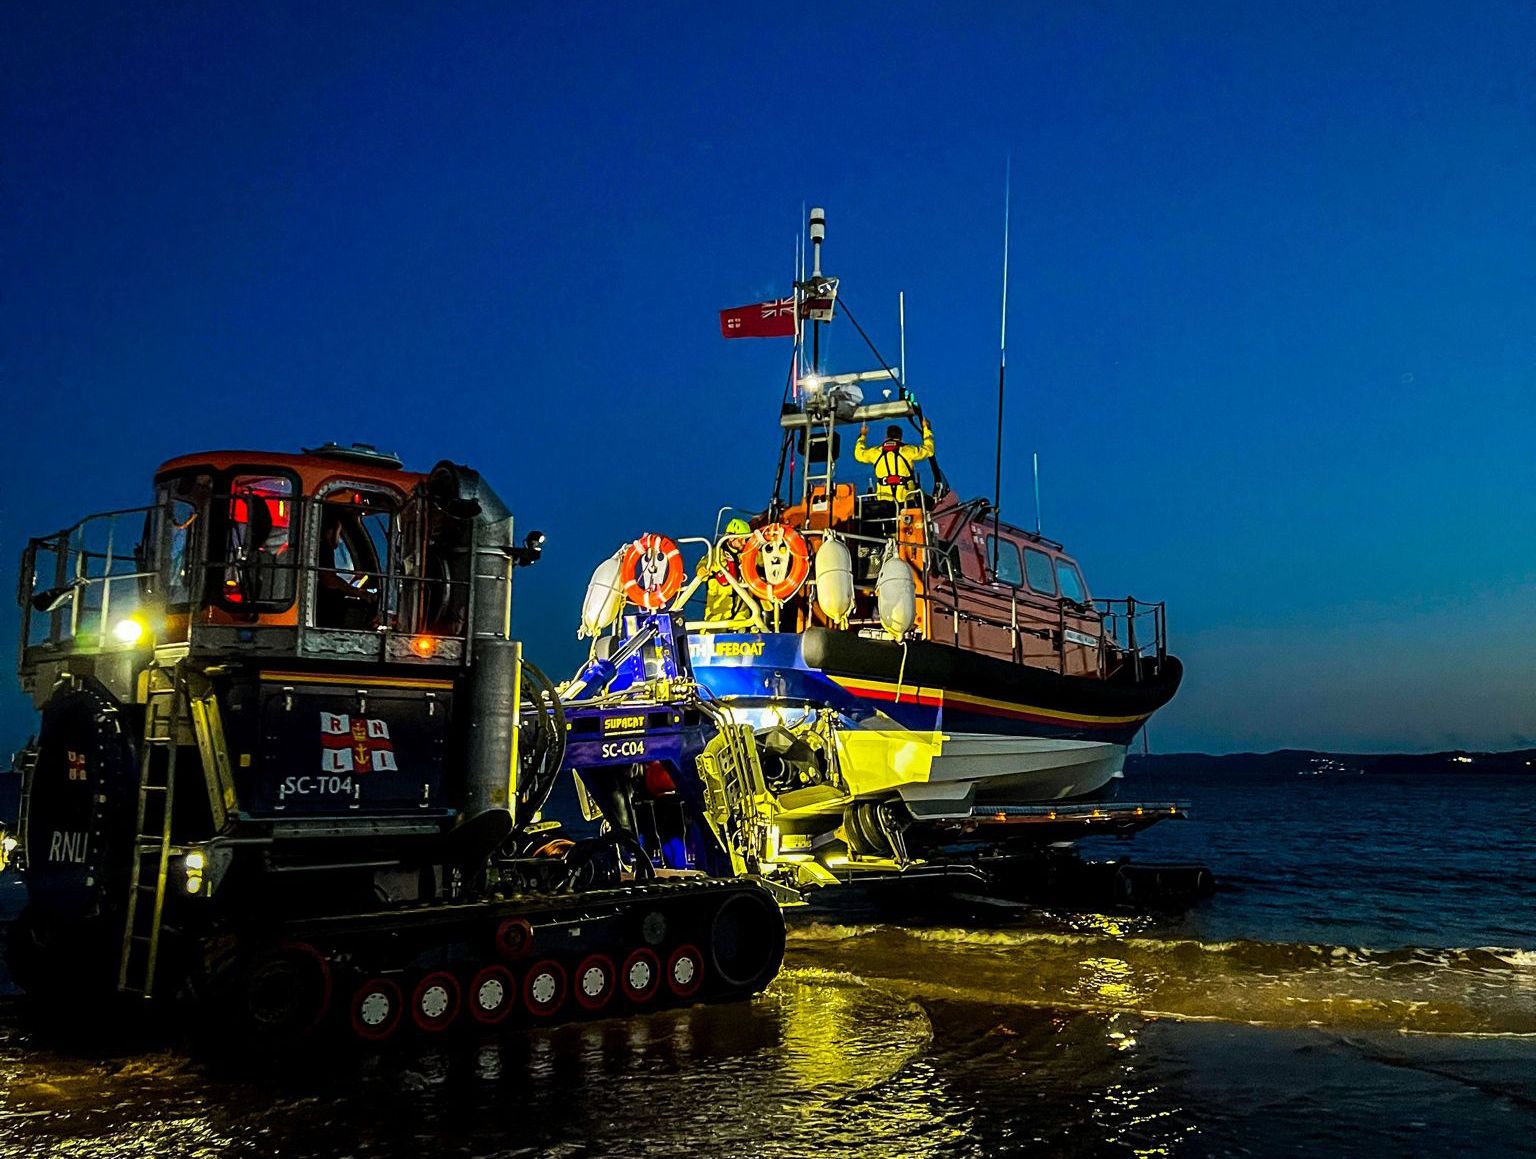 Yacht crew rescued by lifeboat off Devon coast near Exmouth